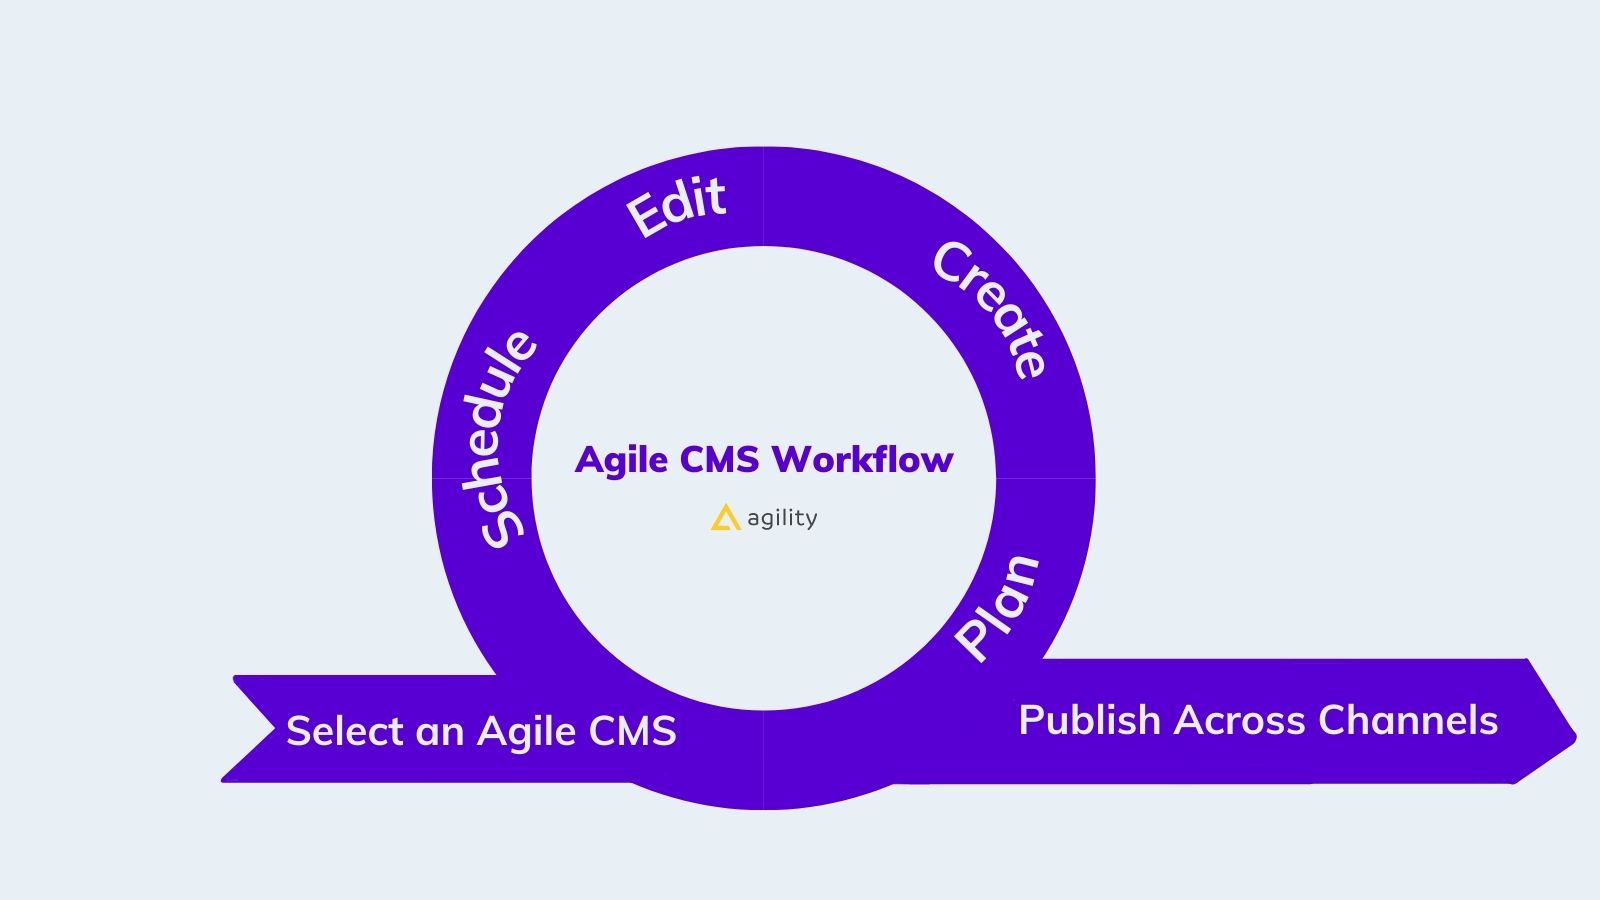 An agile CMS content workflow on agilitycms.com